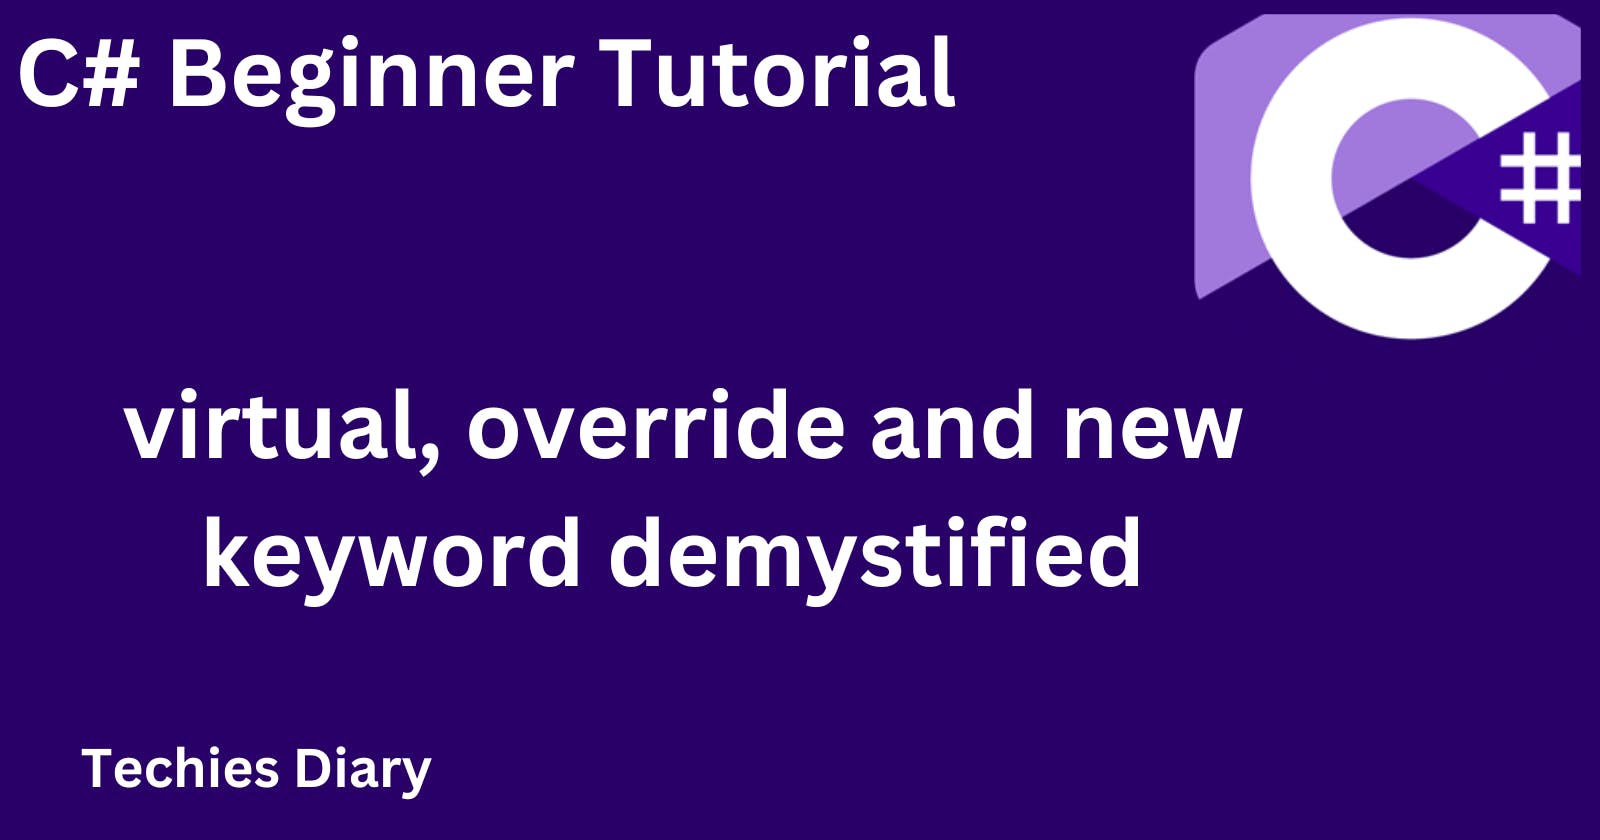 C# virtual, override and new keyword